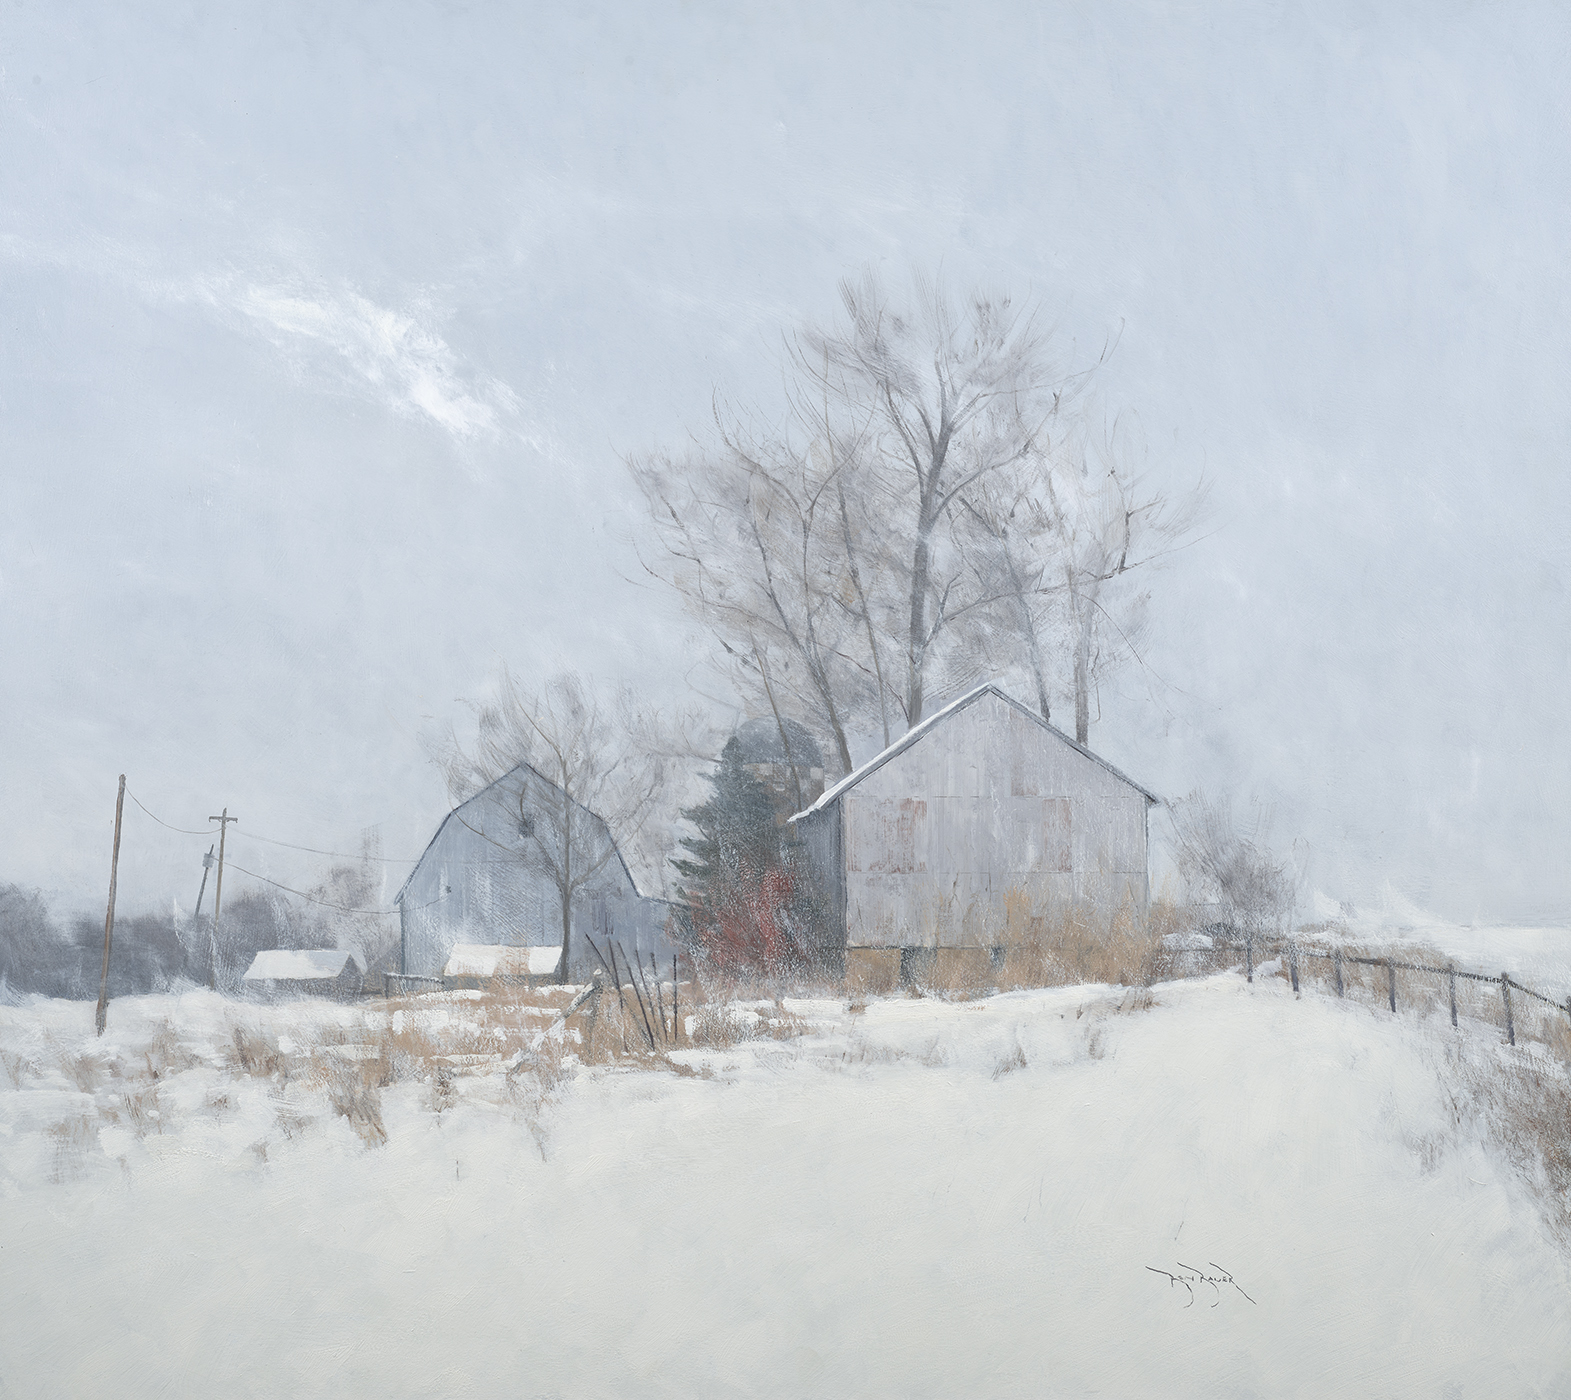 ben_bauer_bb1159_blowing_snow_in_buffalo_county_wi.jpg